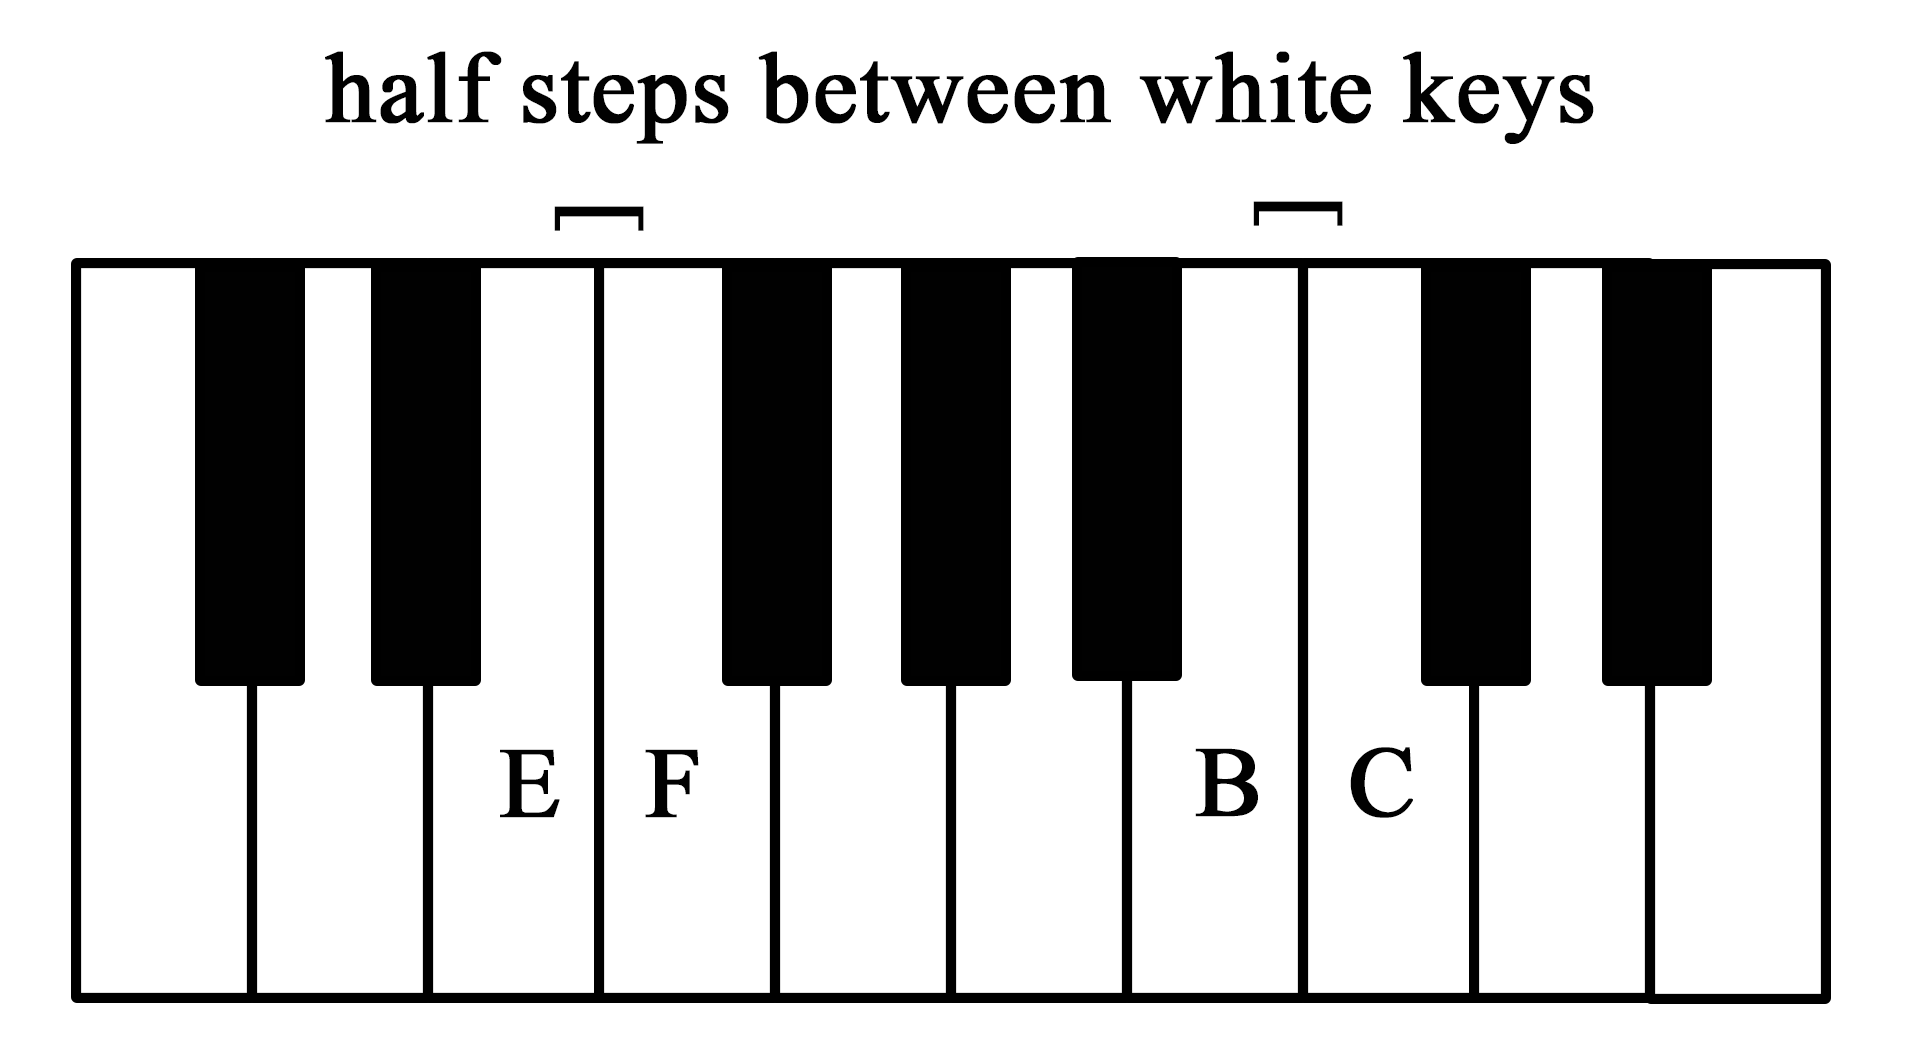 A keyboard with half steps between white keys E and F and B and C labeled.